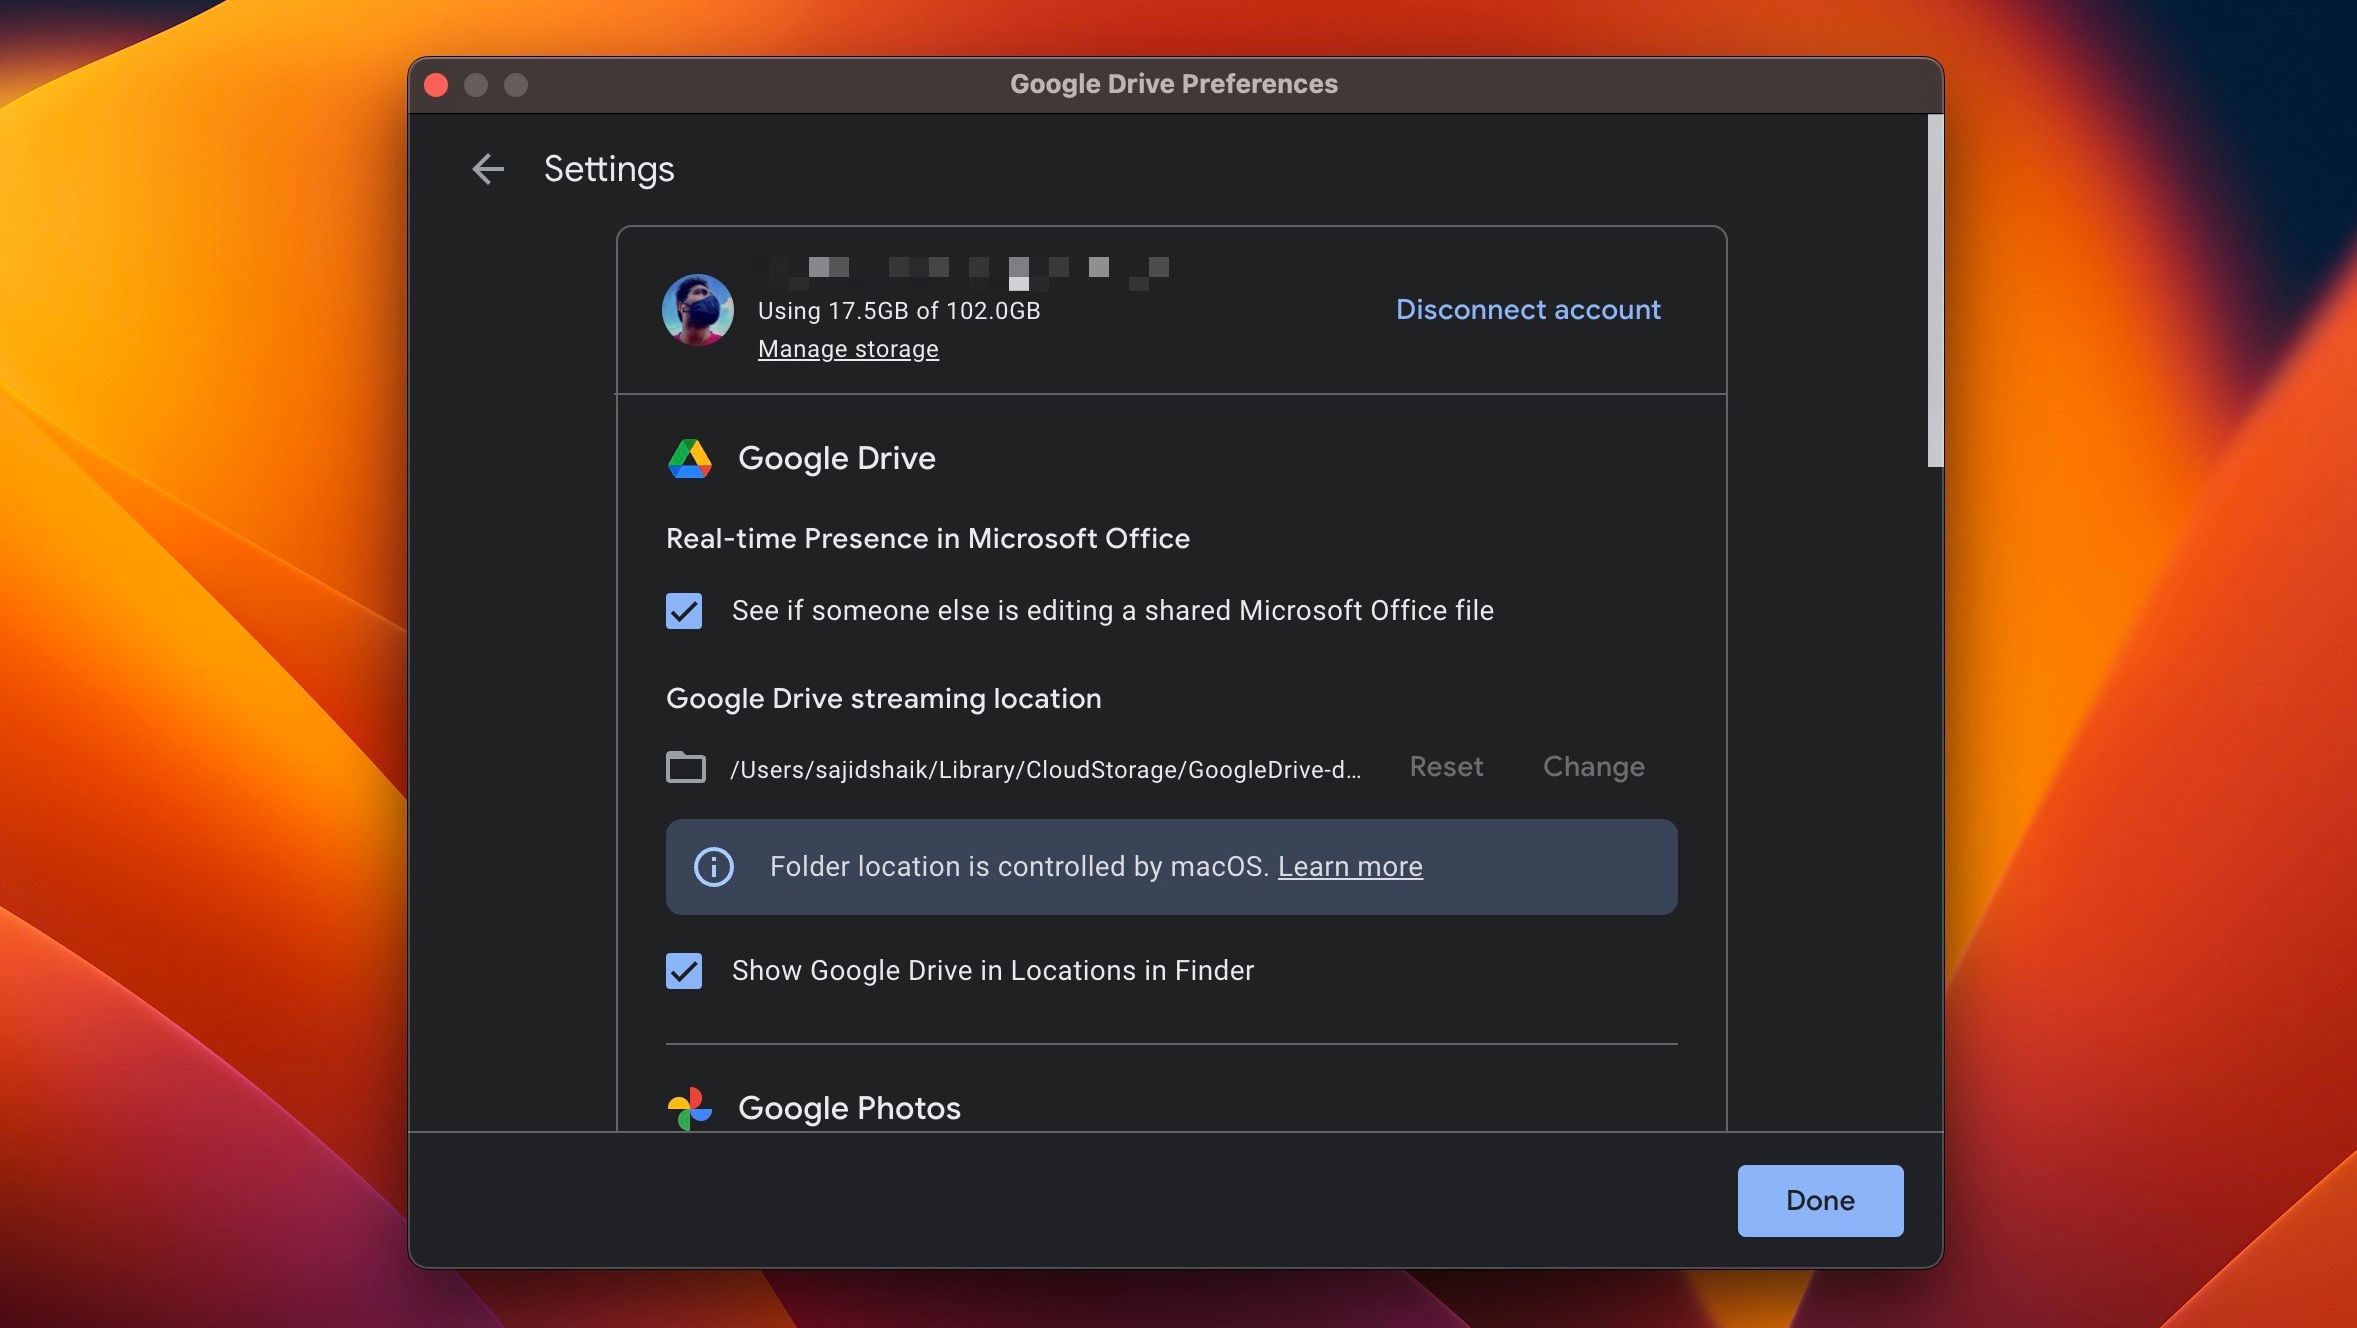 Select Disconnect account from Google Drive preferences